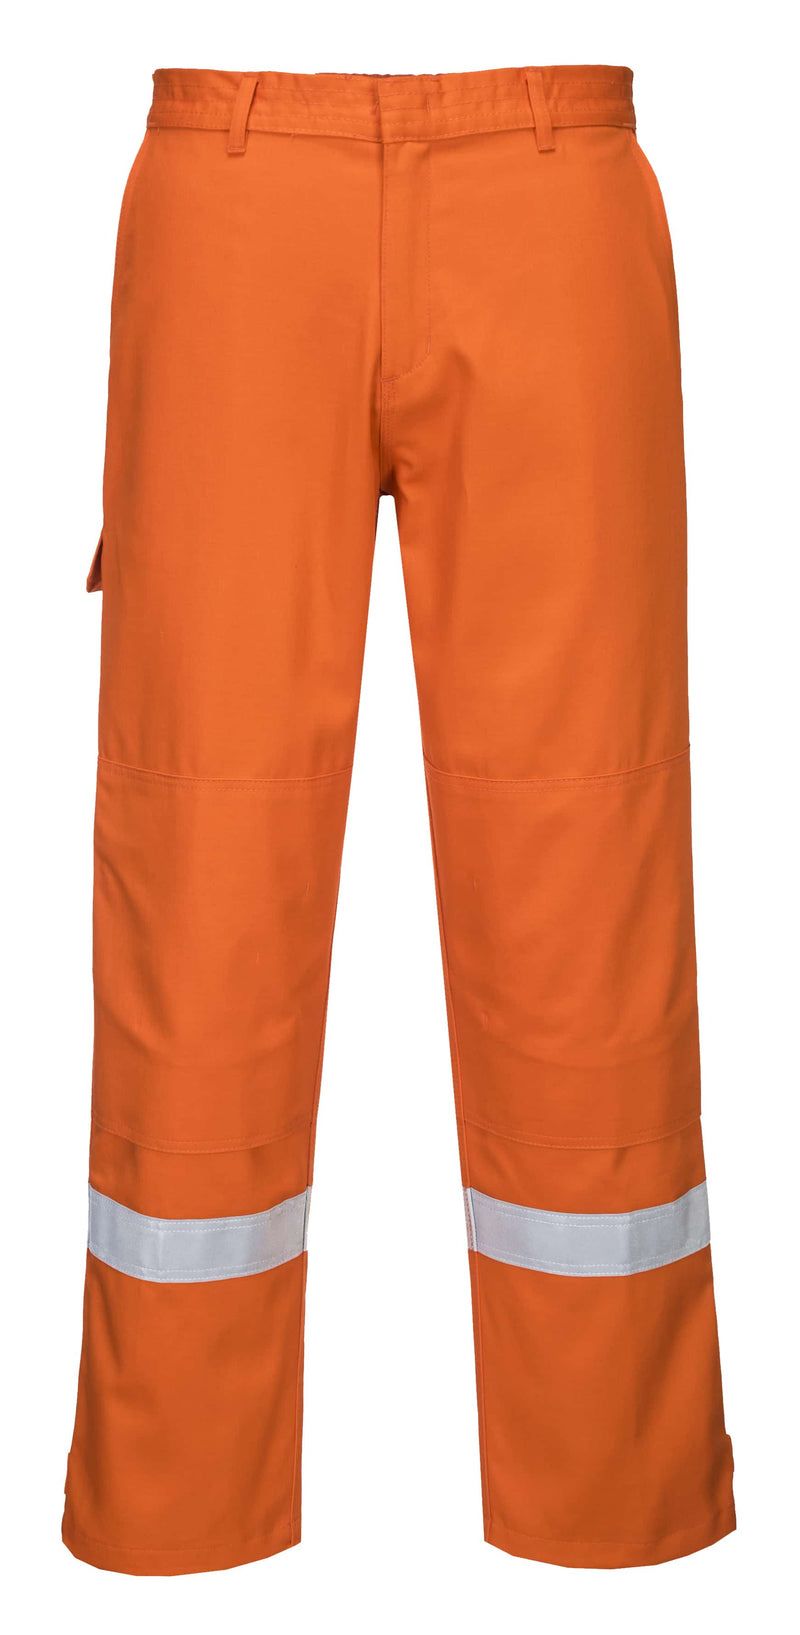 Bizflame Work Trousers